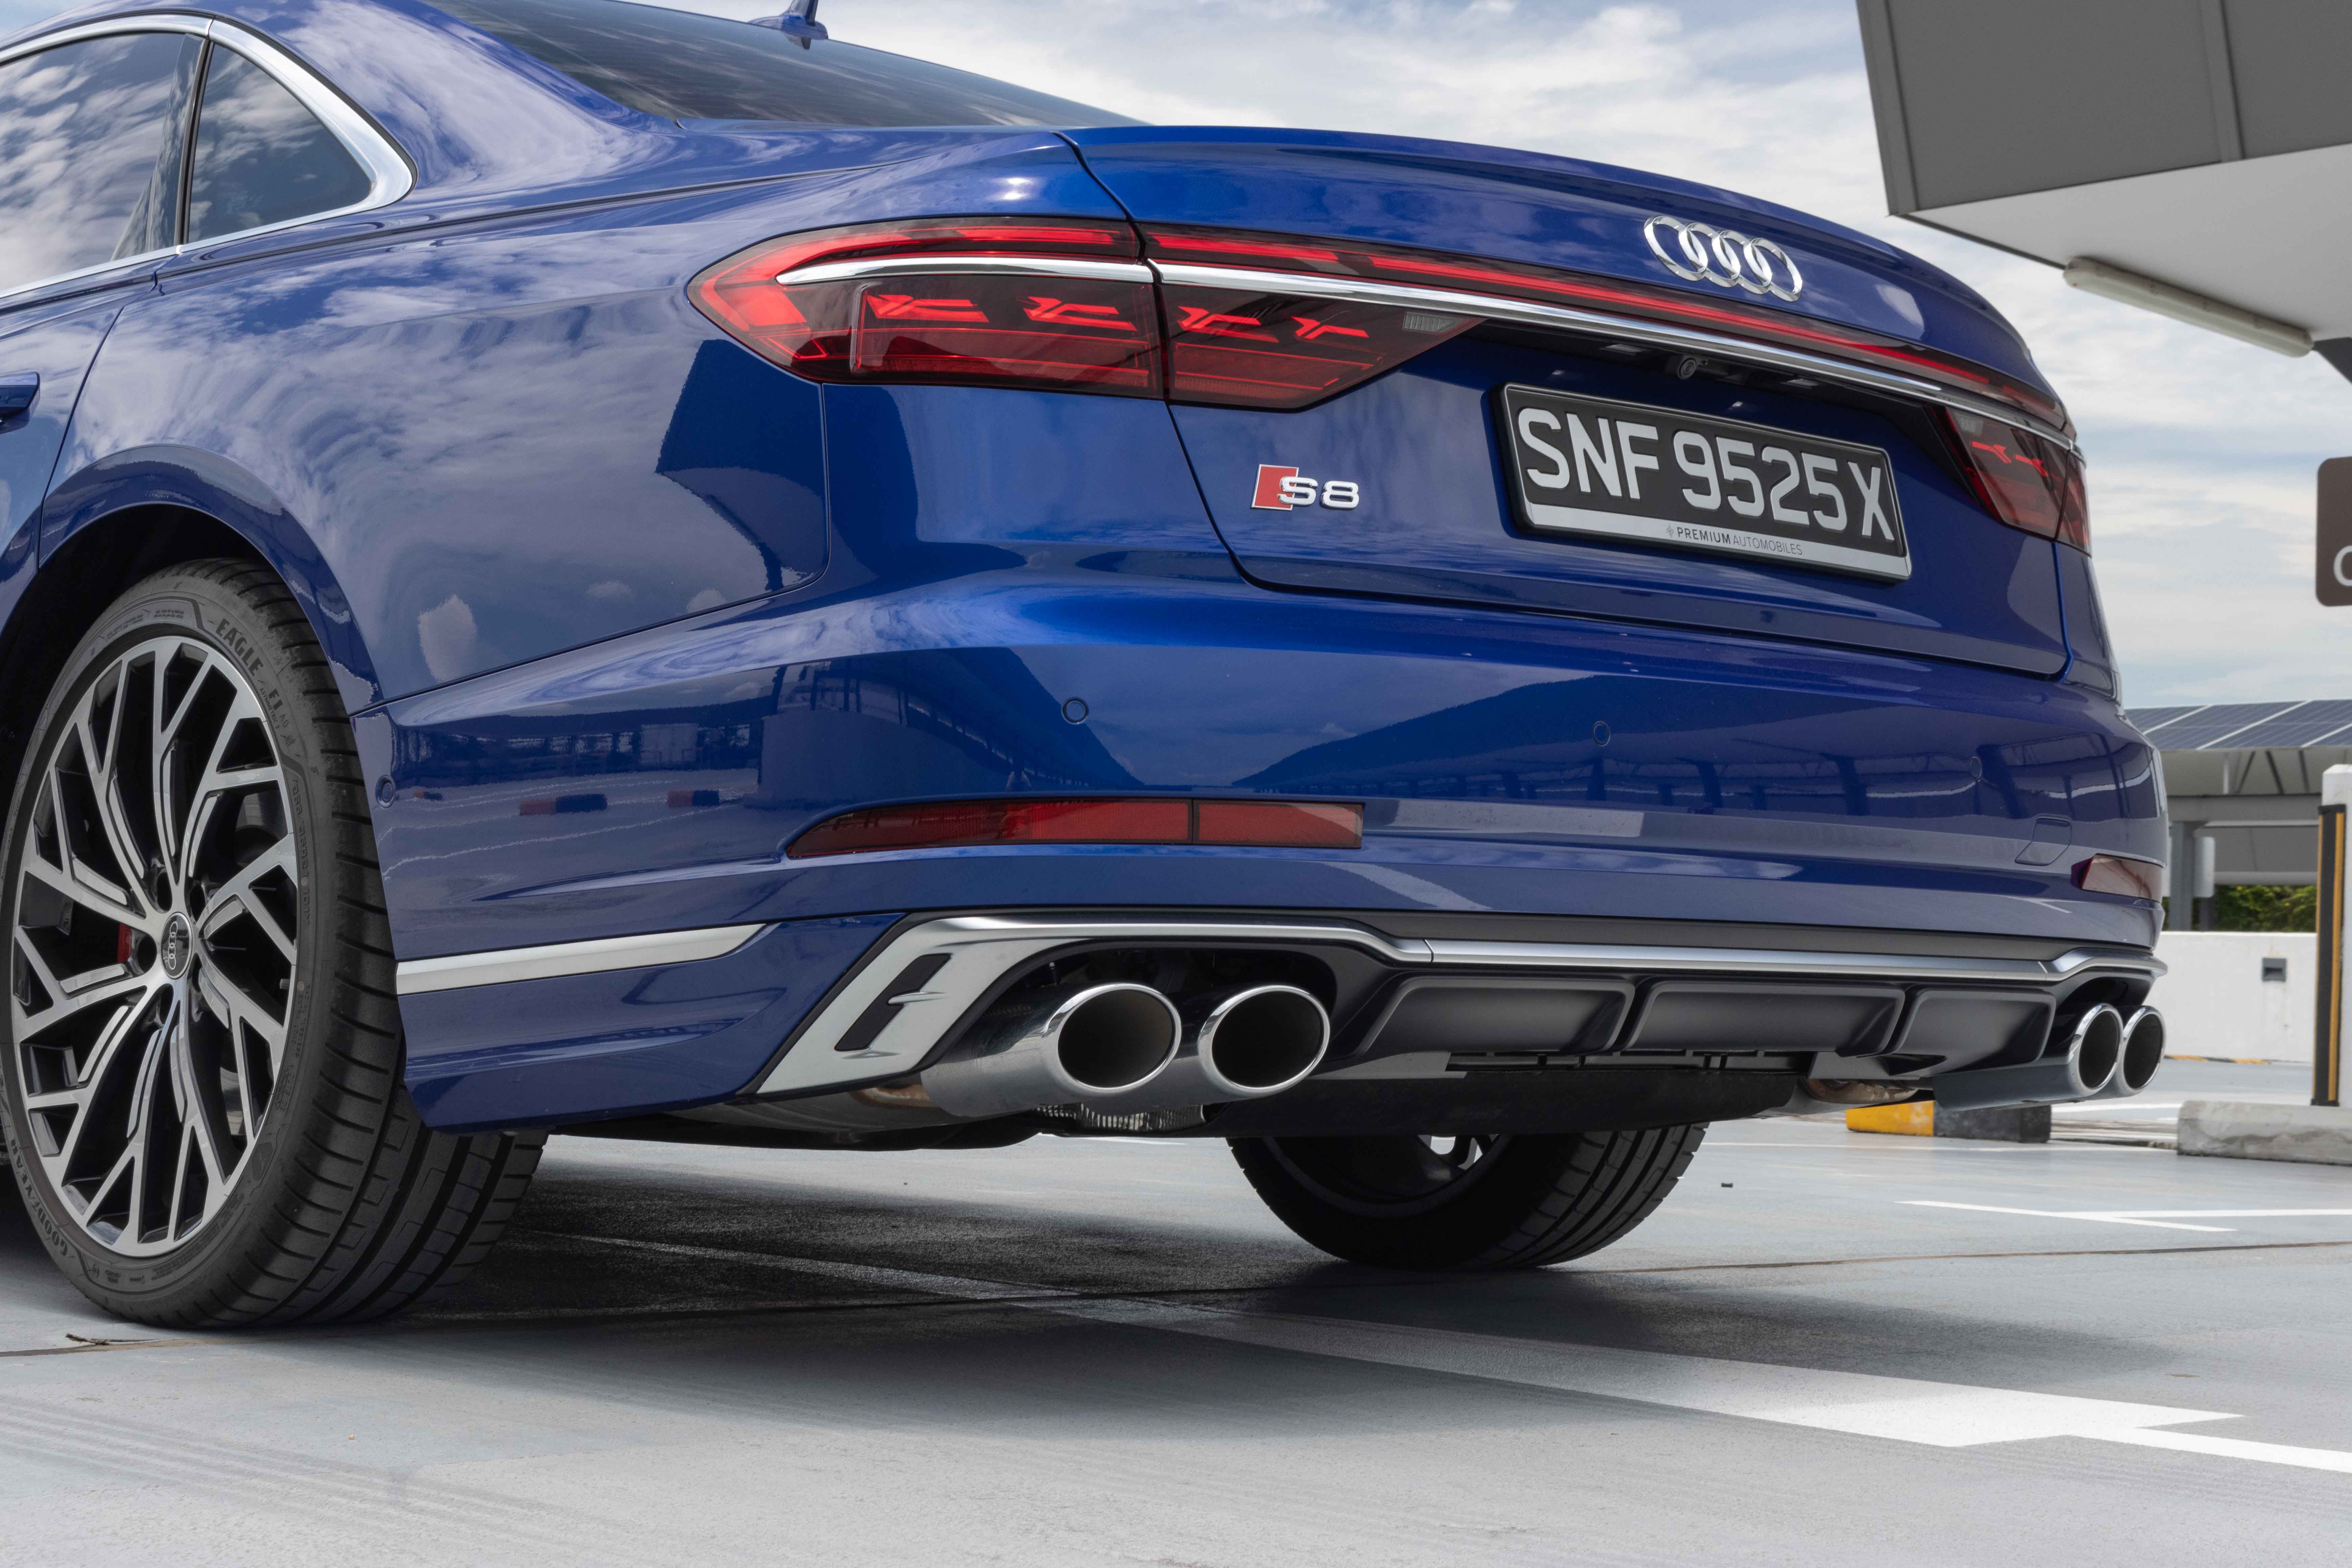 Audi S8 Singapore - Exhaust pipes